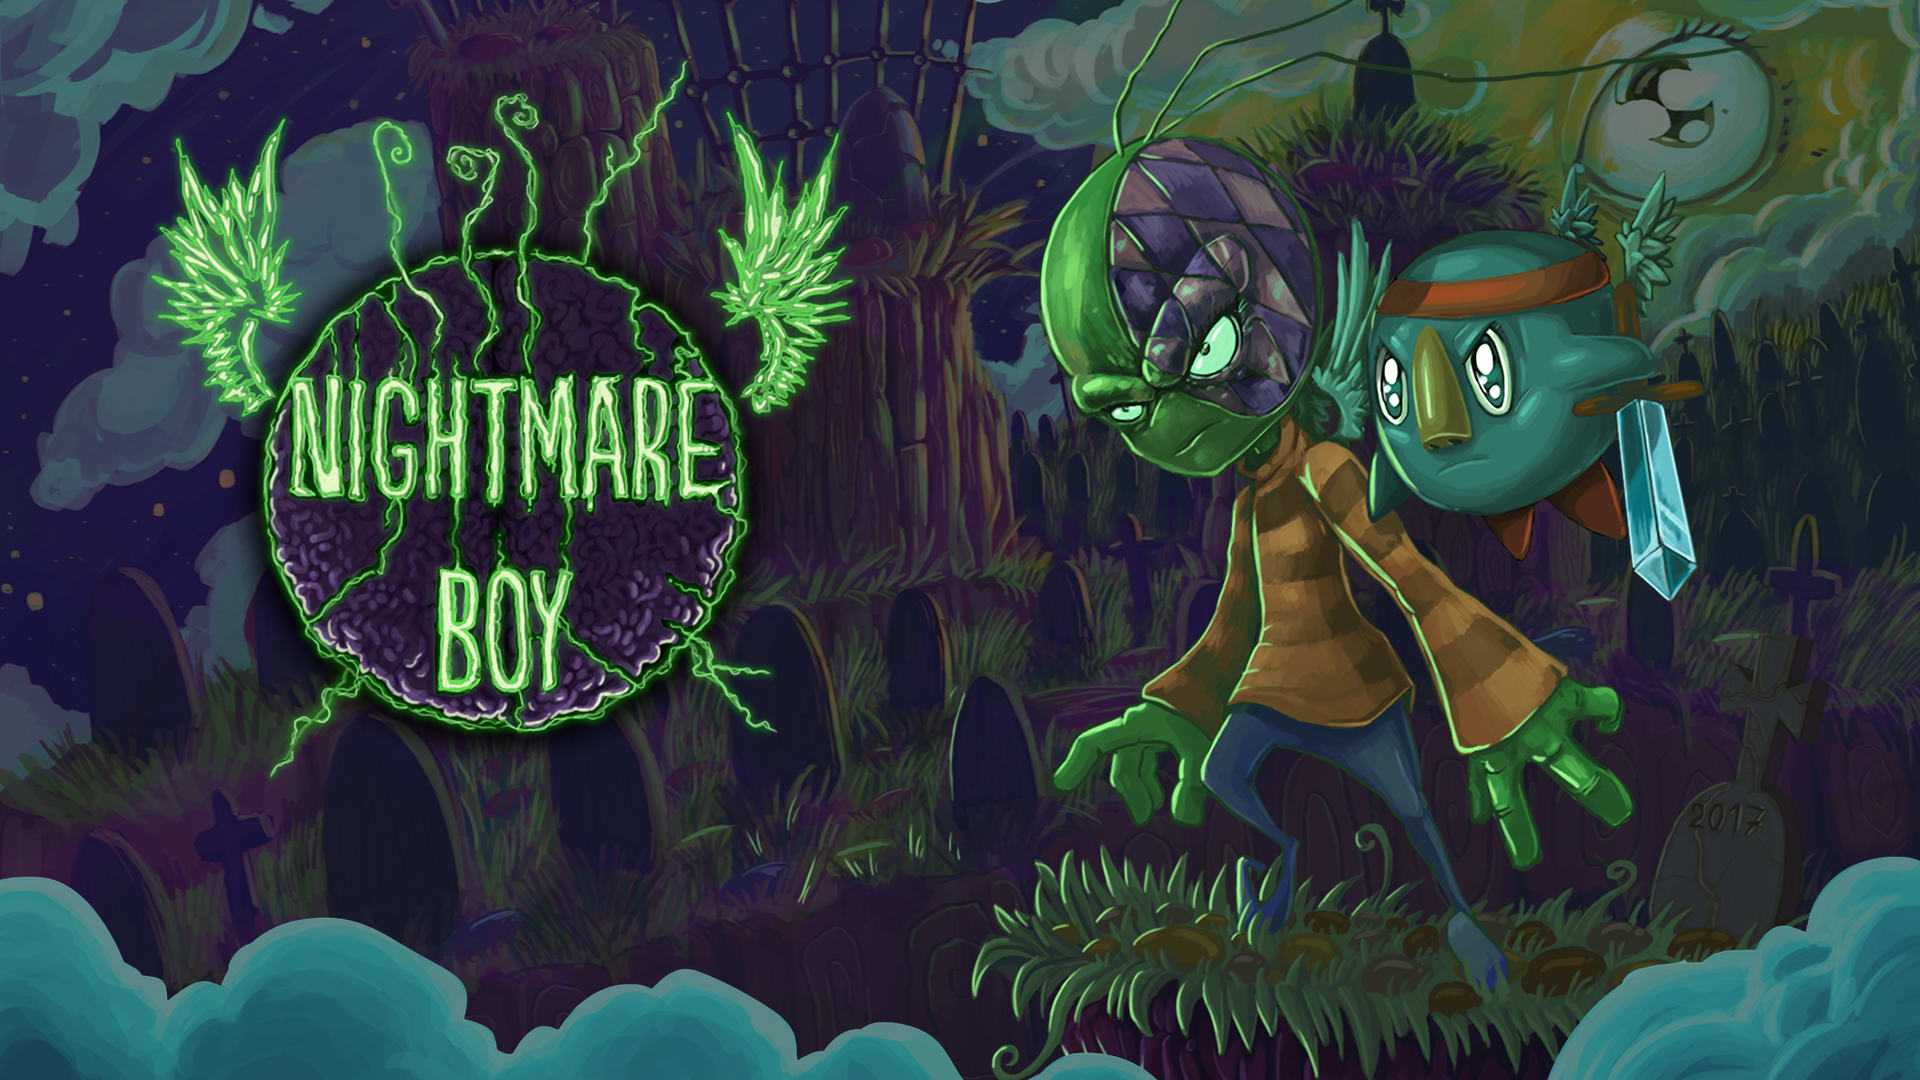 Nightmare Boy: The New Horizons of Reigns of Dreams, a Metroidvania journey with little rusty nightmares, the empire of knight final boss